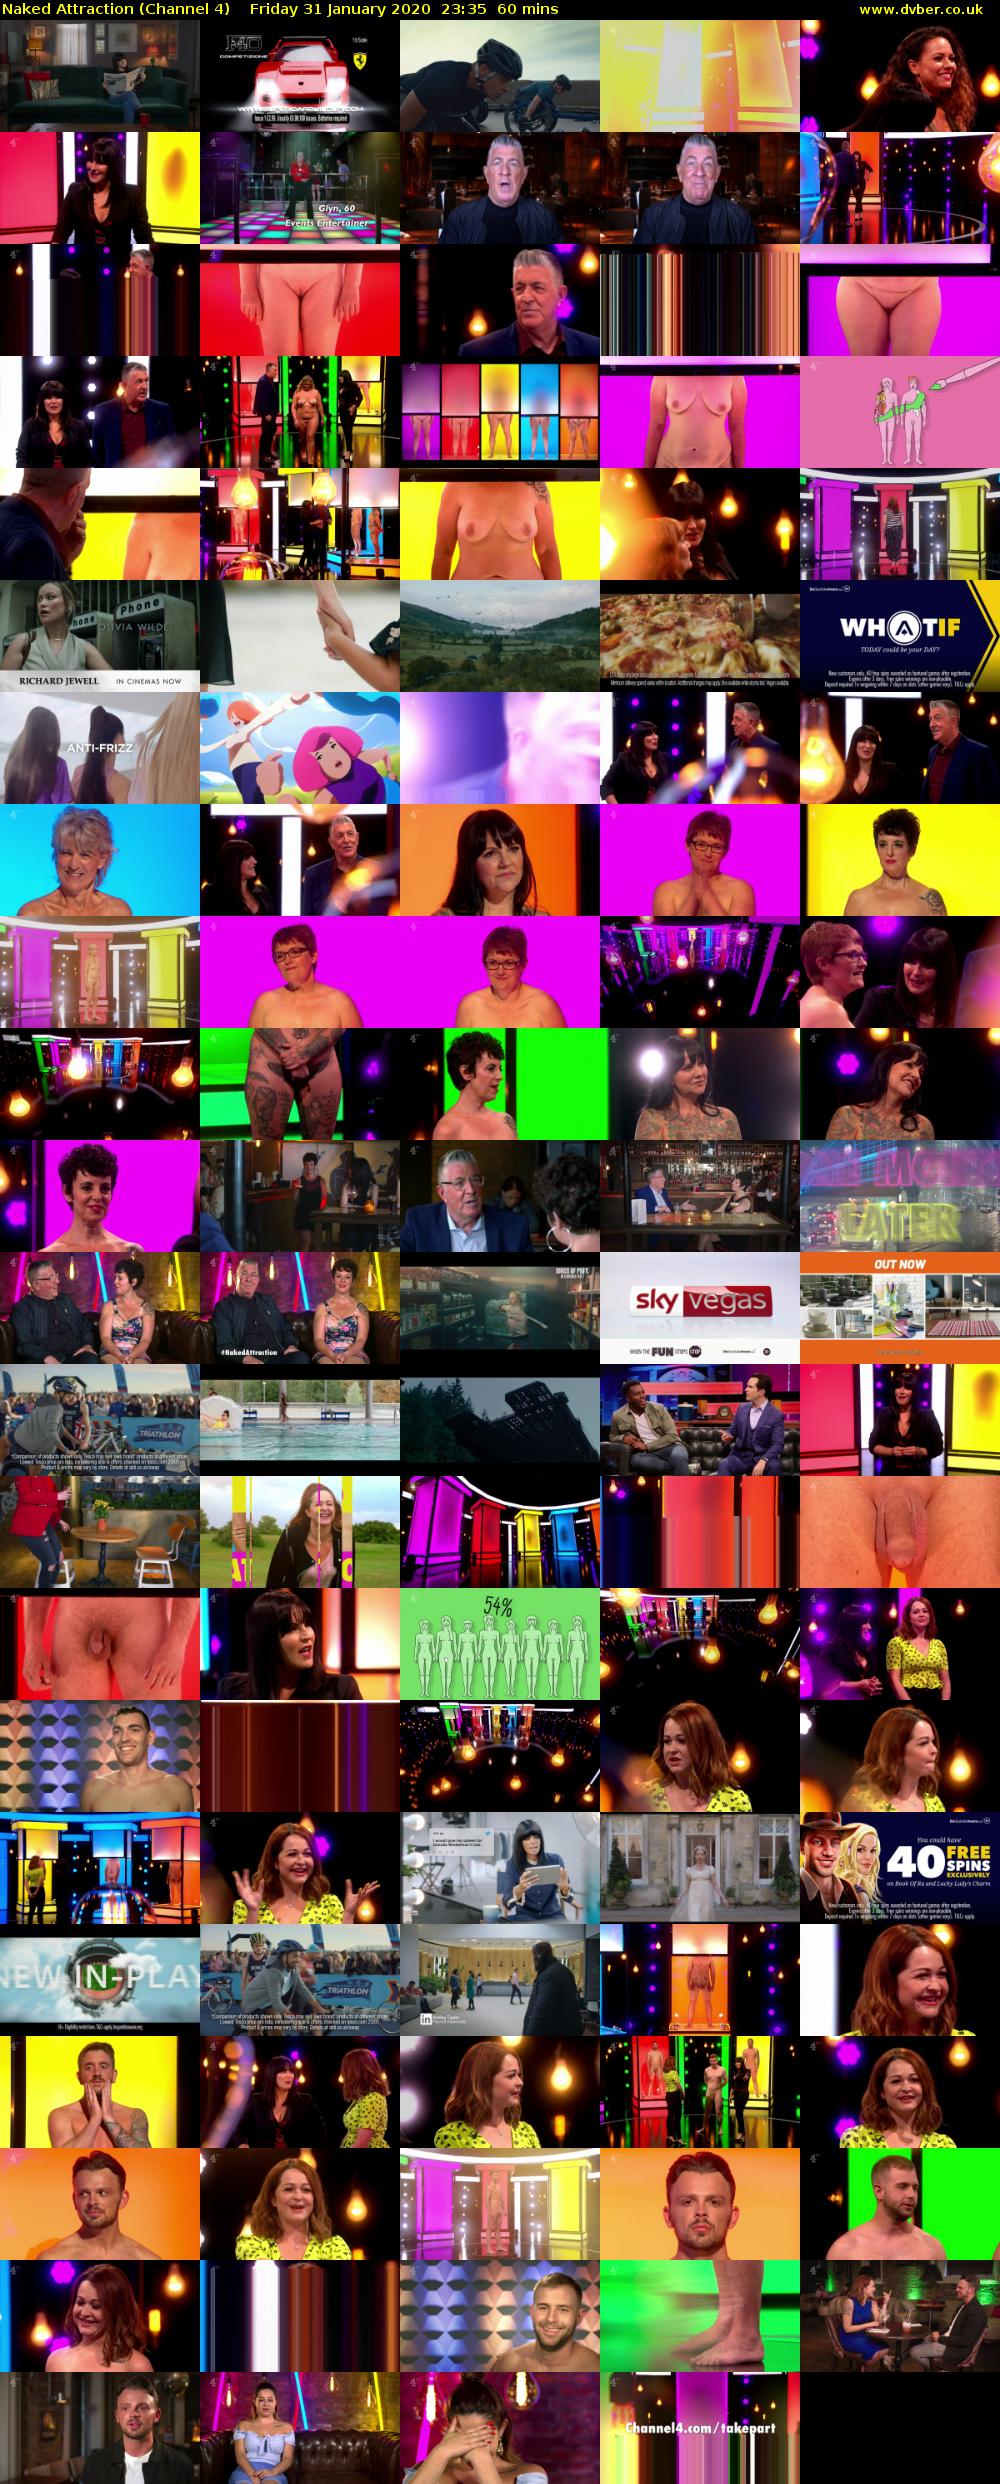 Naked Attraction (Channel 4) Friday 31 January 2020 23:35 - 00:35